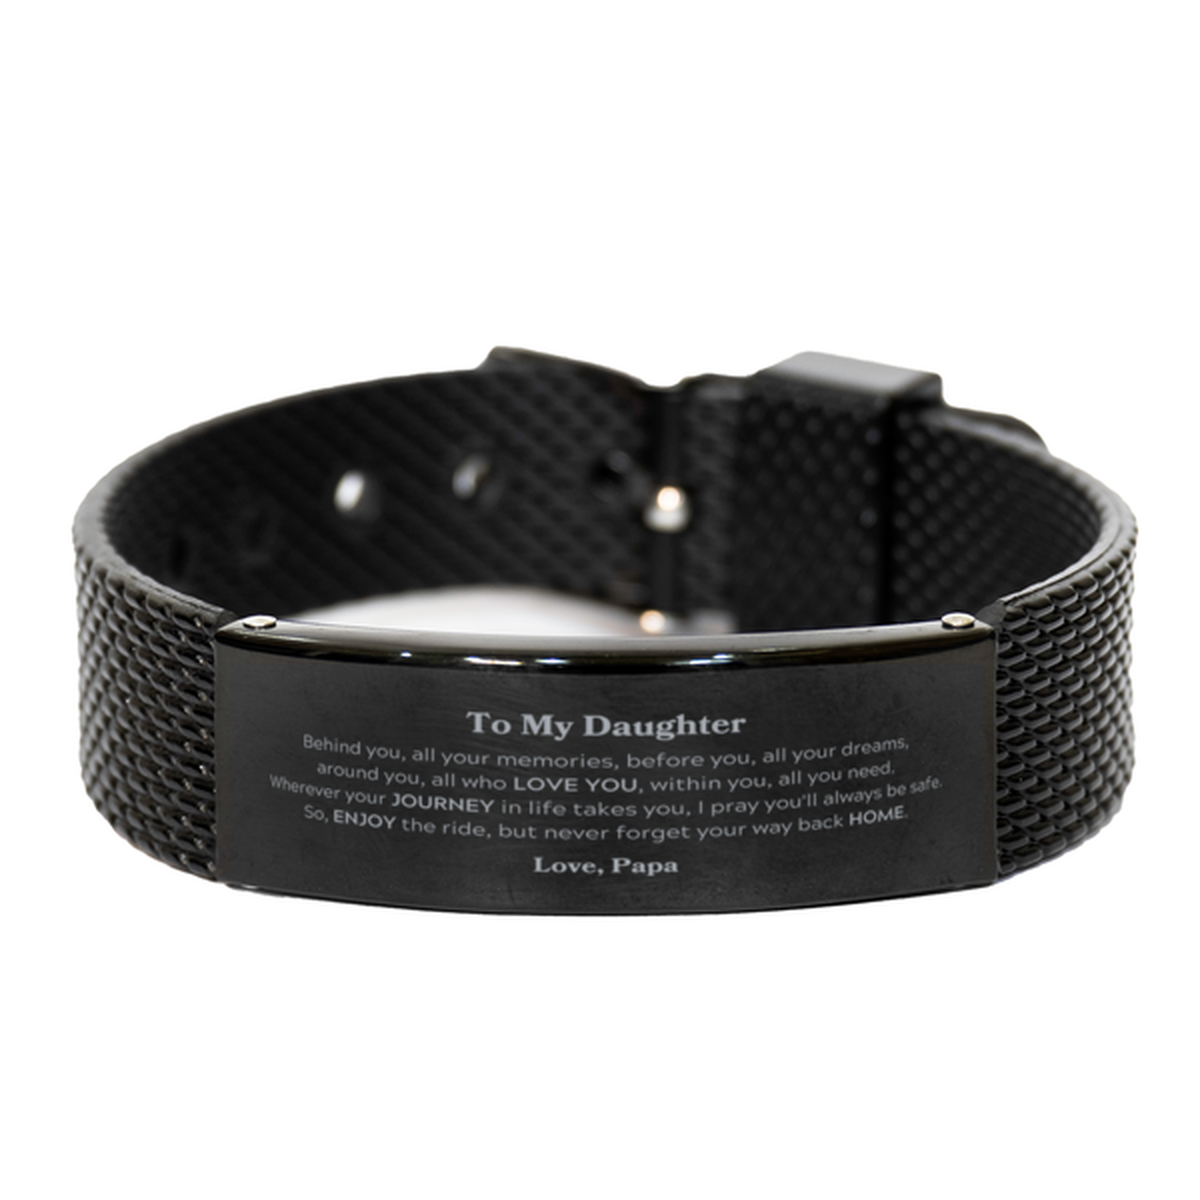 To My Daughter Graduation Gifts from Papa, Daughter Black Shark Mesh Bracelet Christmas Birthday Gifts for Daughter Behind you, all your memories, before you, all your dreams. Love, Papa